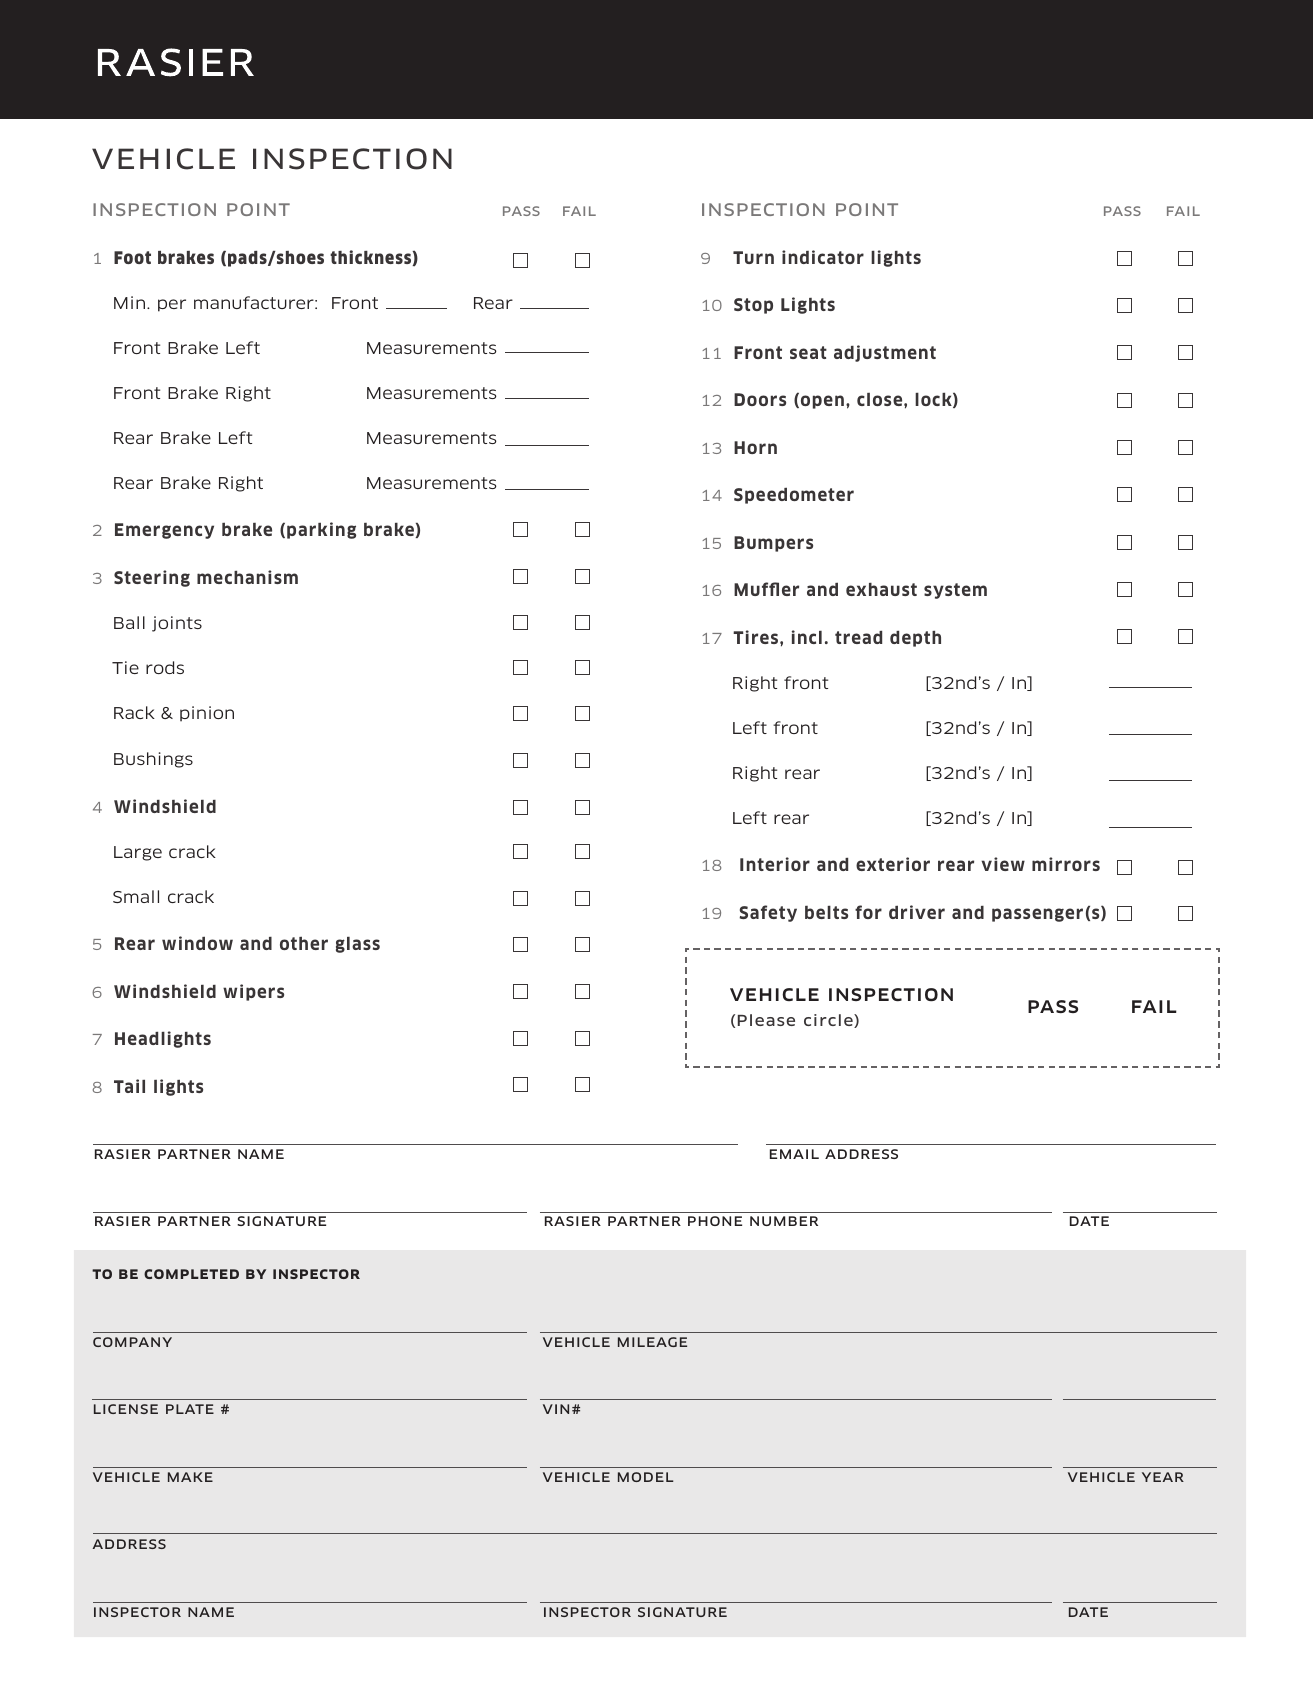 Download Vehicle Inspection Checklist Template | Excel ...